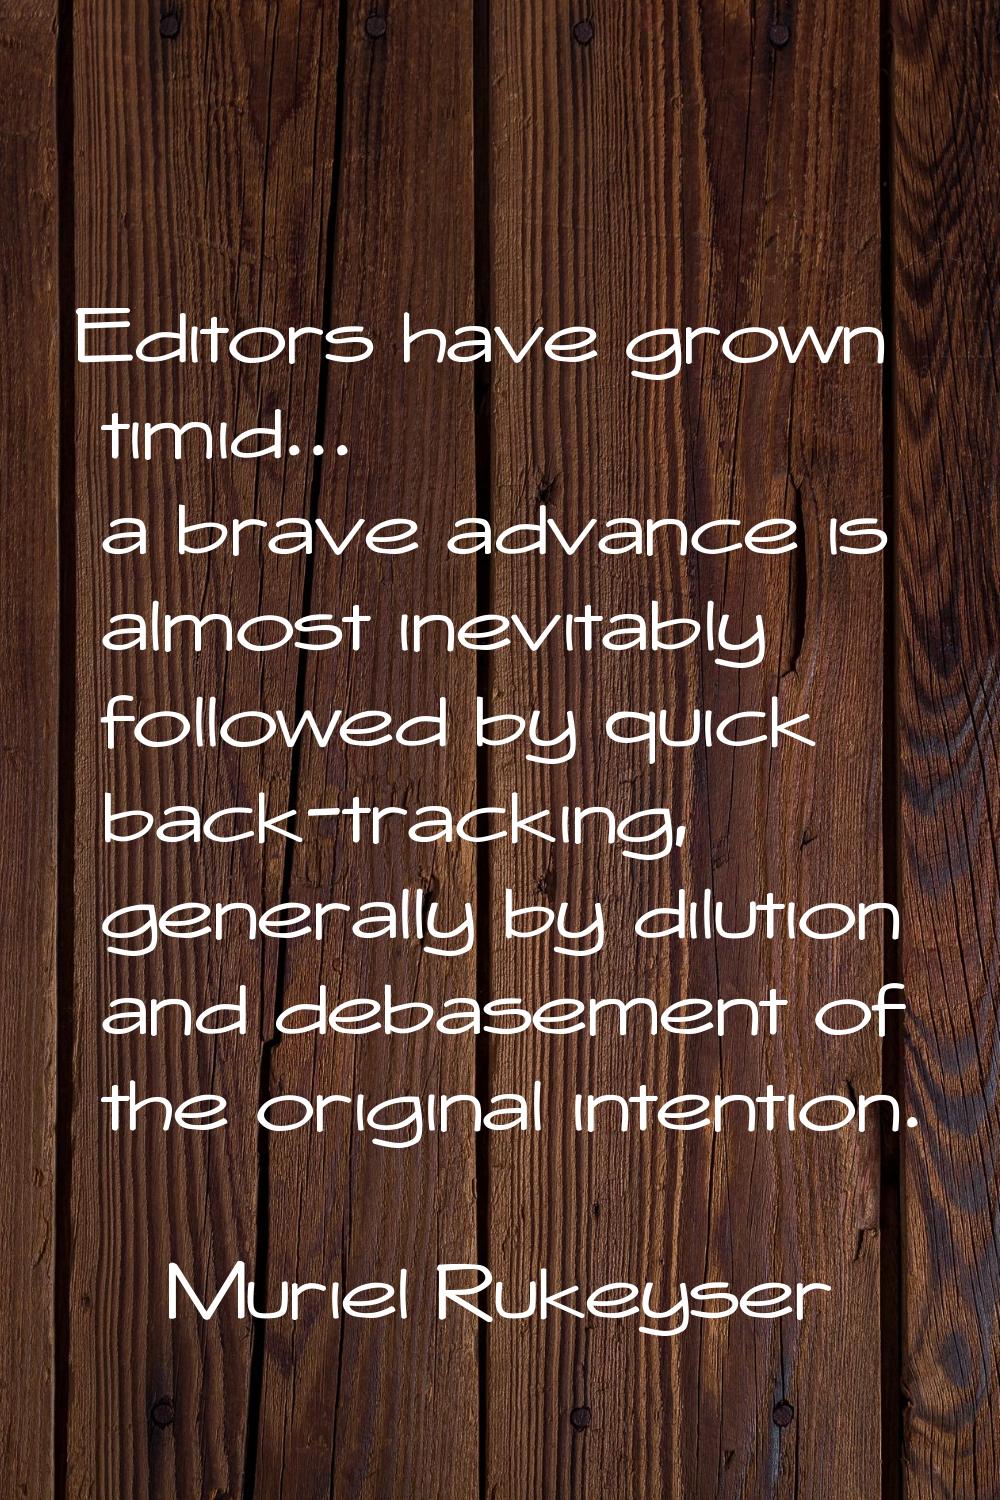 Editors have grown timid... a brave advance is almost inevitably followed by quick back-tracking, g